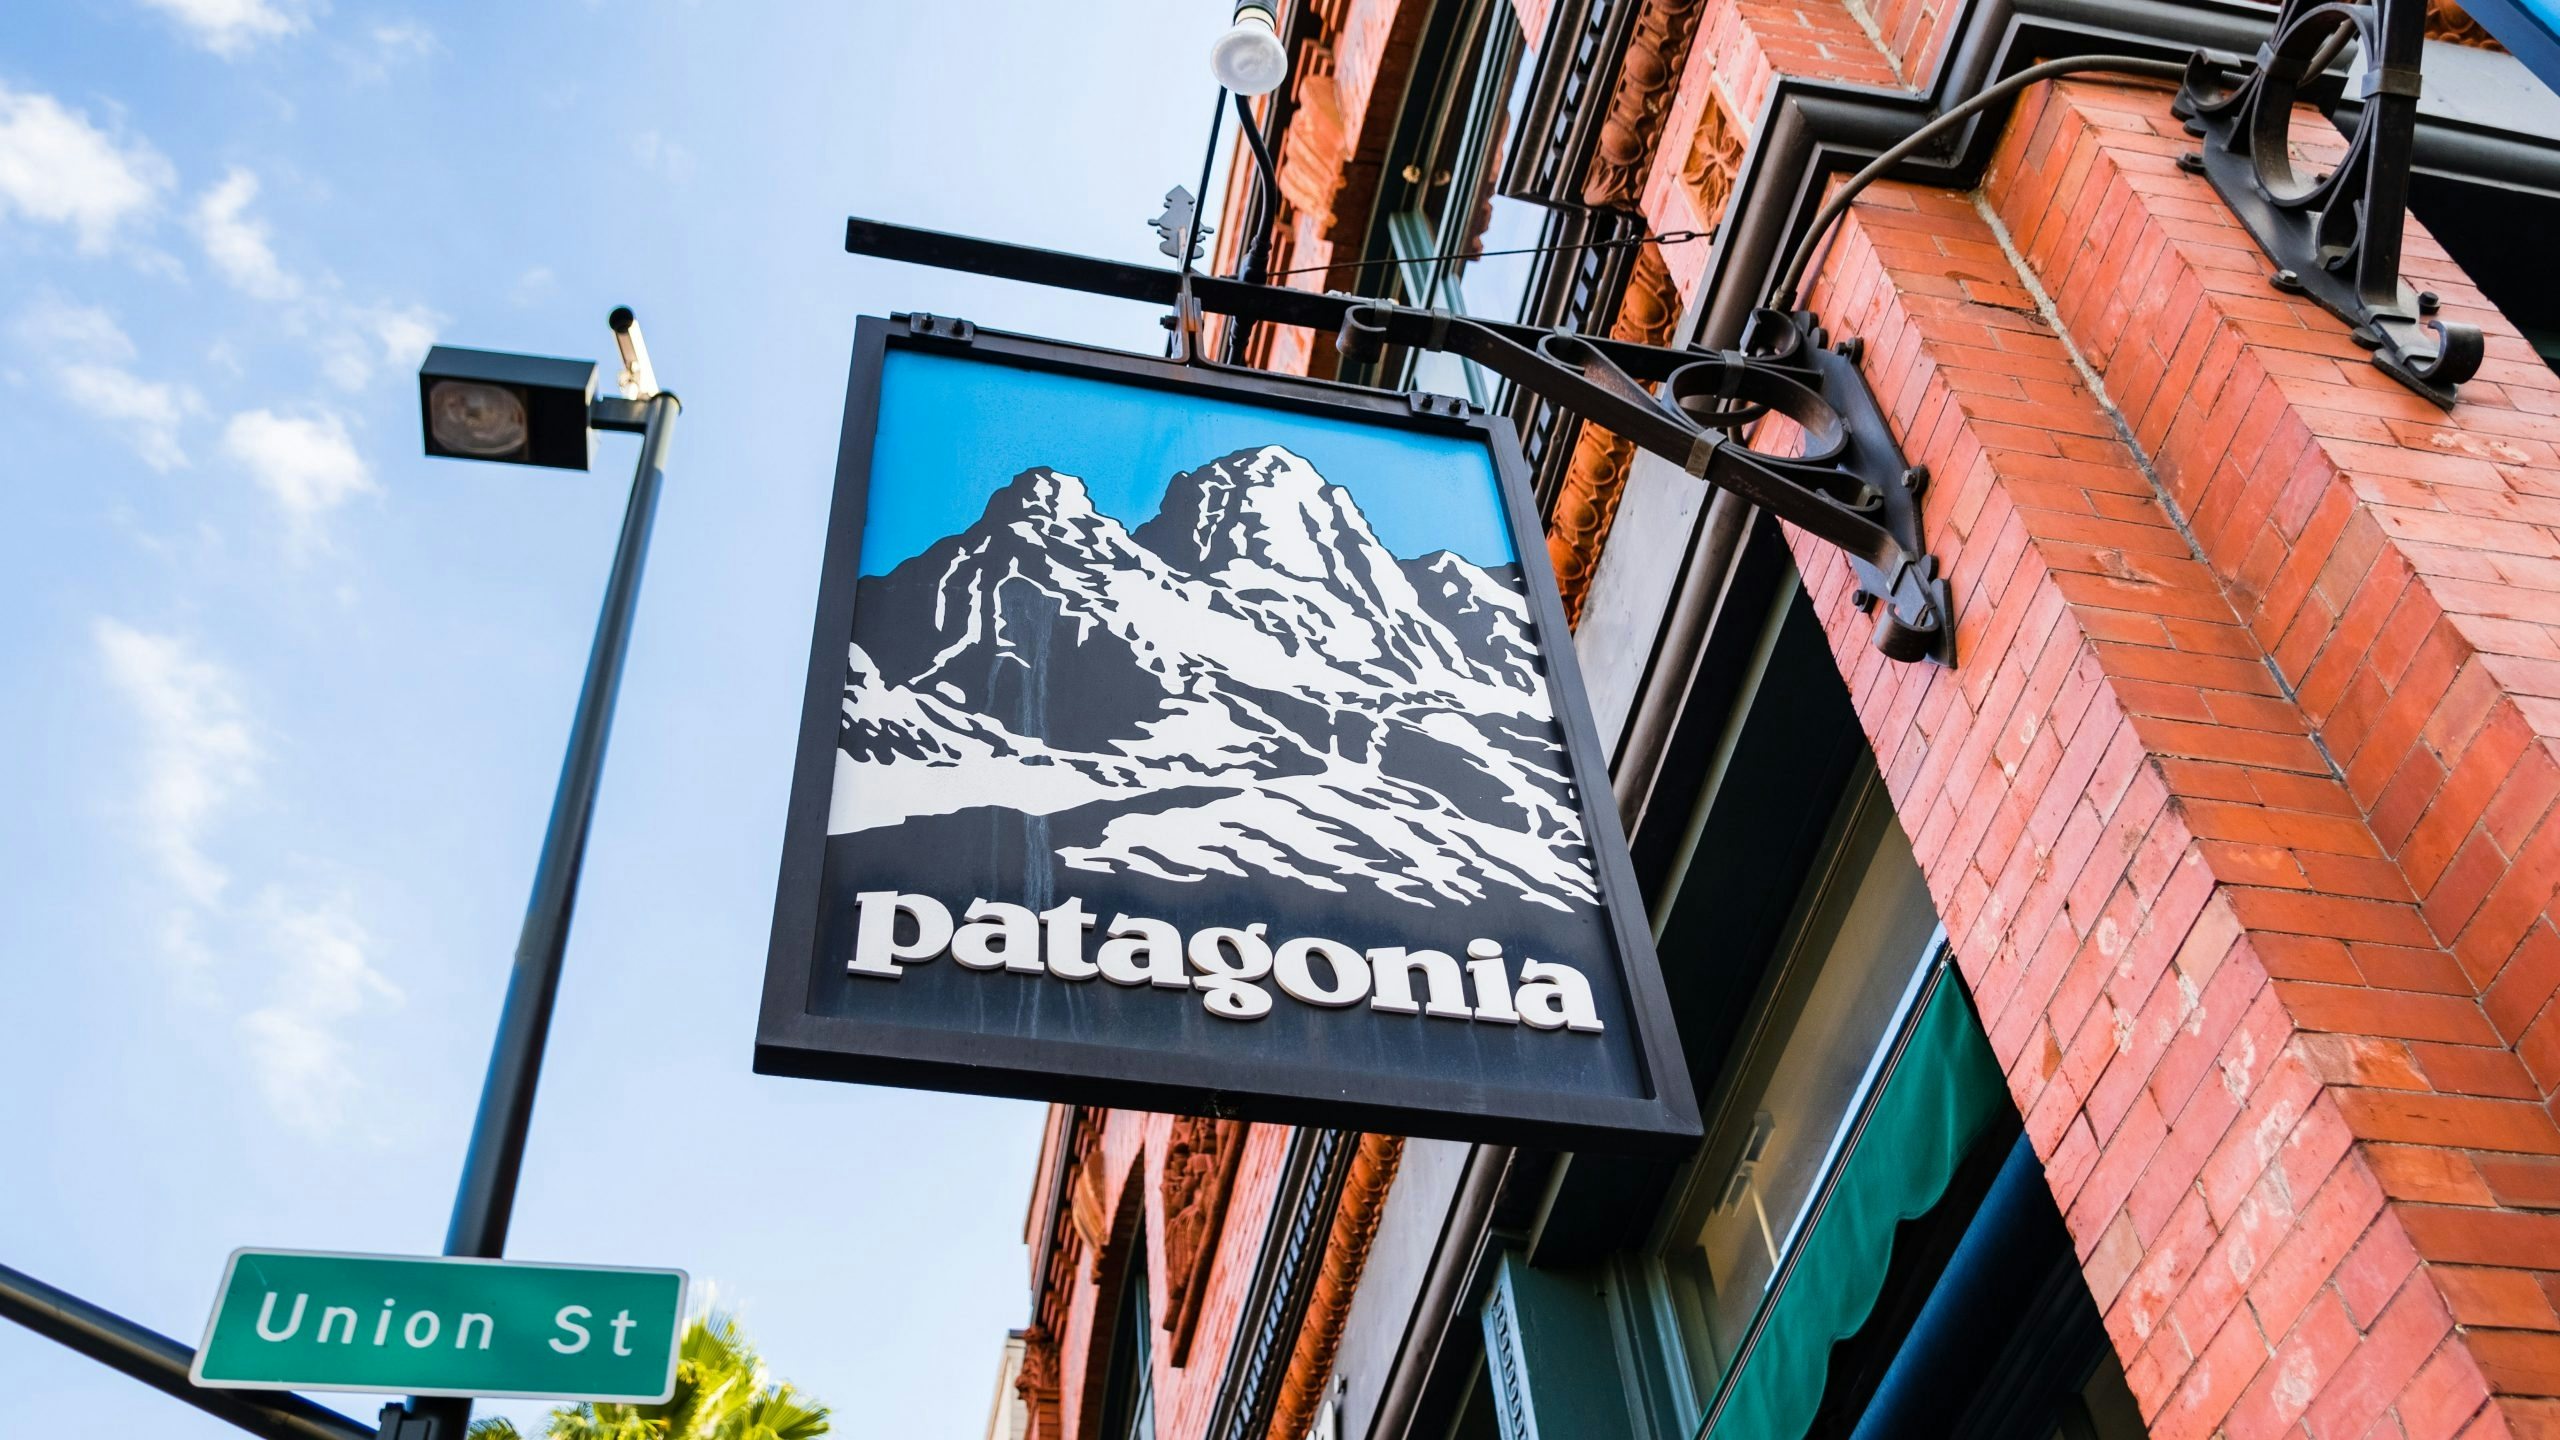 How sustainable is the outdoor clothing brand Patagonia?